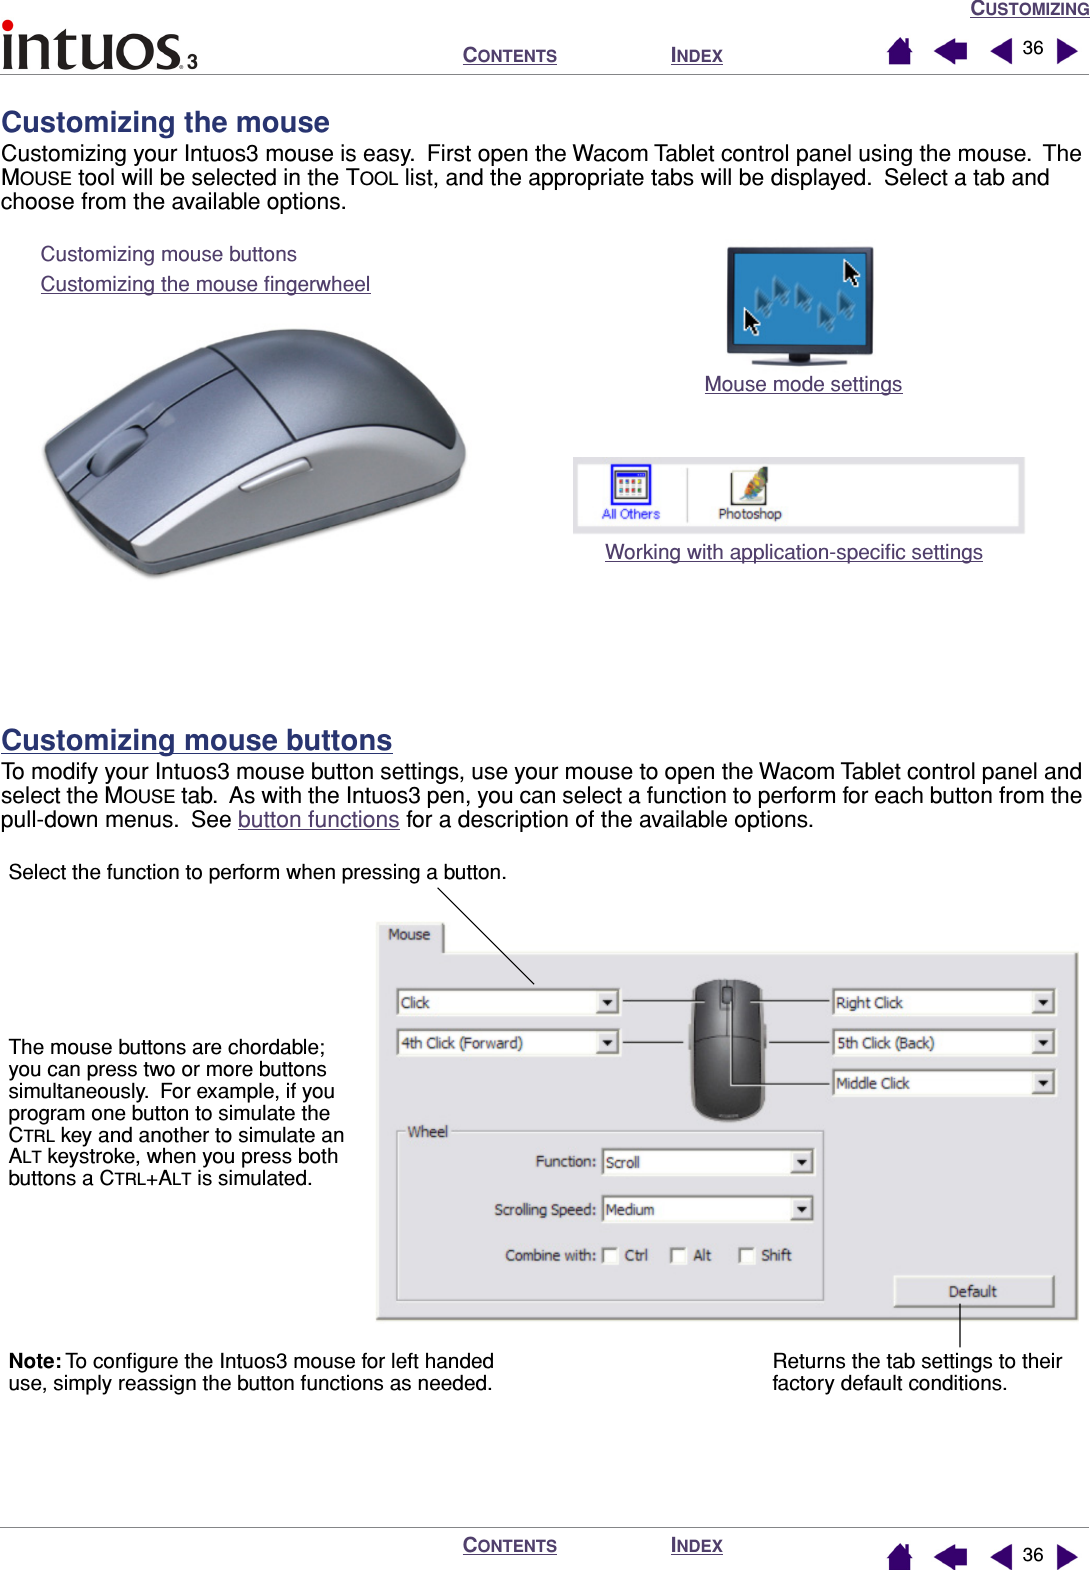 CUSTOMIZINGINDEXCONTENTSINDEXCONTENTS 3636Customizing the mouseCustomizing your Intuos3 mouse is easy.  First open the Wacom Tablet control panel using the mouse.  The MOUSE tool will be selected in the TOOL list, and the appropriate tabs will be displayed.  Select a tab and choose from the available options.Customizing mouse buttonsTo modify your Intuos3 mouse button settings, use your mouse to open the Wacom Tablet control panel and select the MOUSE tab.  As with the Intuos3 pen, you can select a function to perform for each button from the pull-down menus.  See button functions for a description of the available options.  Customizing mouse buttonsCustomizing the mouse ﬁngerwheelMouse mode settingsWorking with application-speciﬁc settingsNote: To conﬁgure the Intuos3 mouse for left handed use, simply reassign the button functions as needed.Select the function to perform when pressing a button.The mouse buttons are chordable; you can press two or more buttons simultaneously.  For example, if you program one button to simulate the CTRL key and another to simulate an ALT keystroke, when you press both buttons a CTRL+ALT is simulated.Returns the tab settings to their factory default conditions.